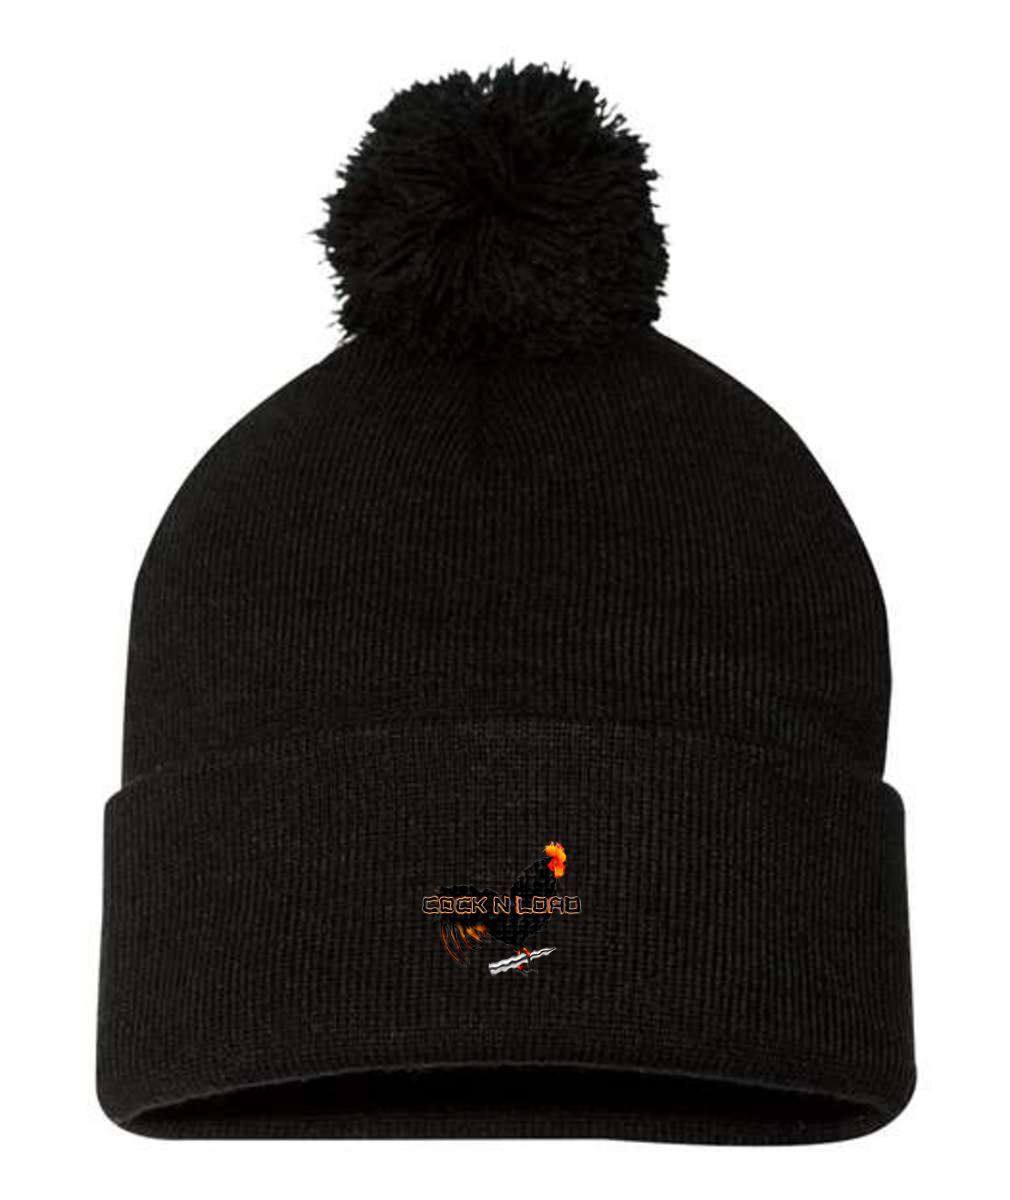 Cock n load 2 Embroidered Pom Pom 12 Knit Beanie